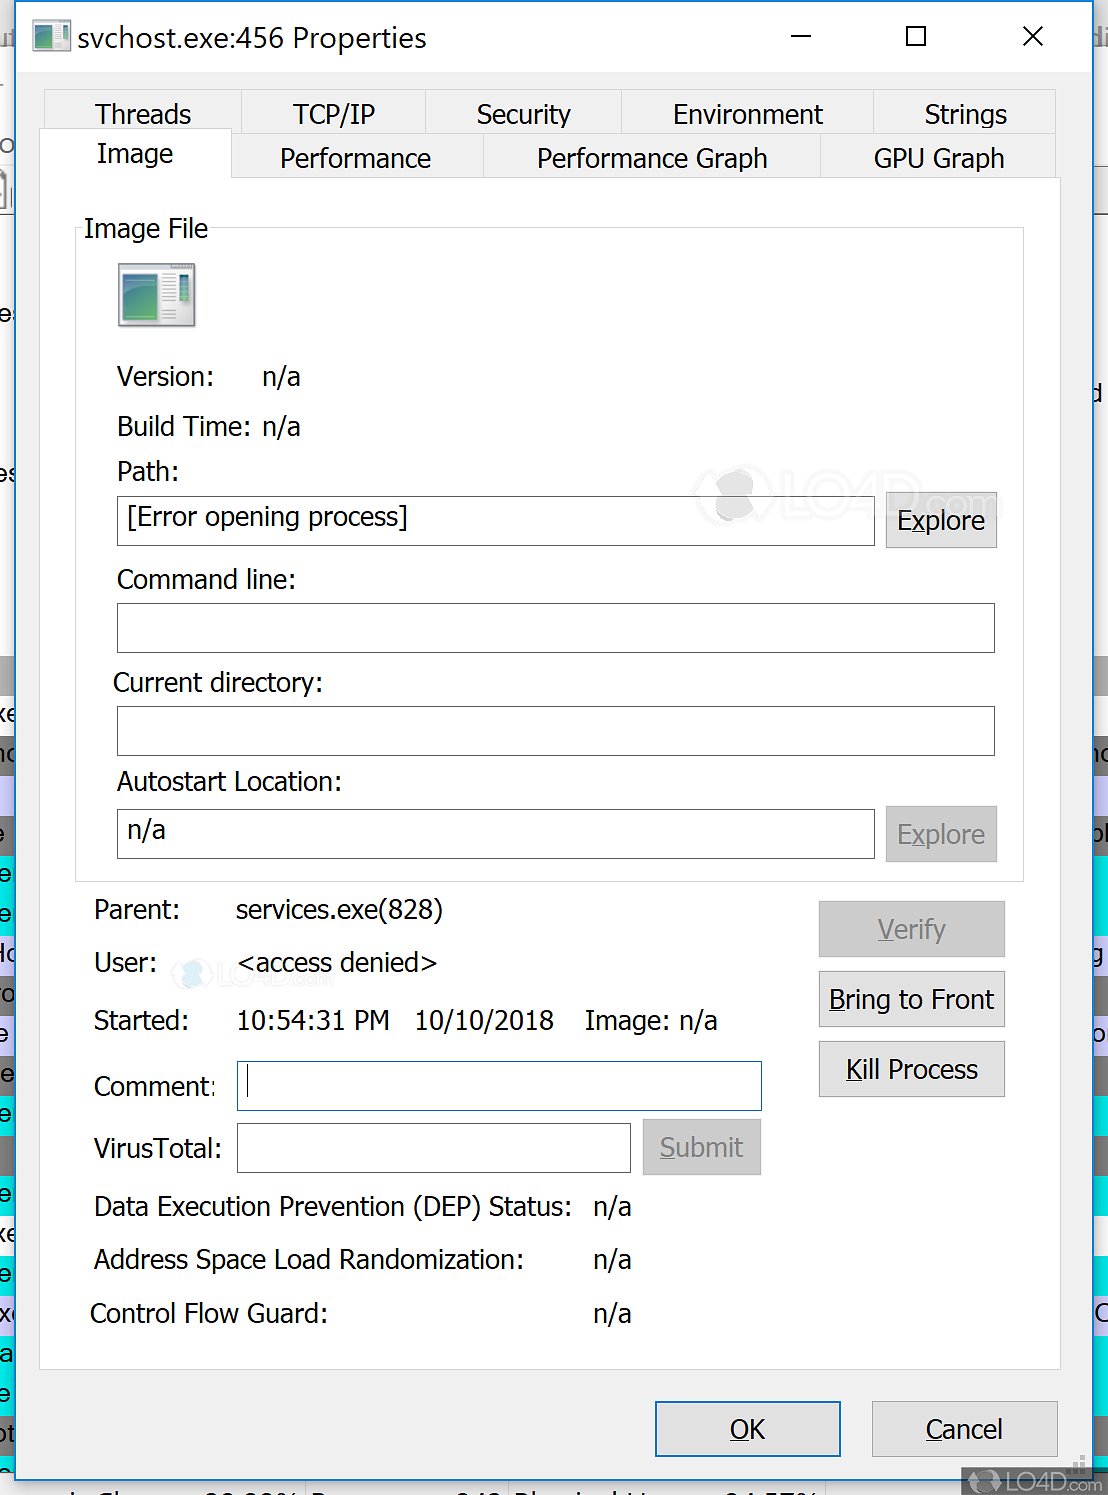 Process Explorer 17.05 download the new for ios